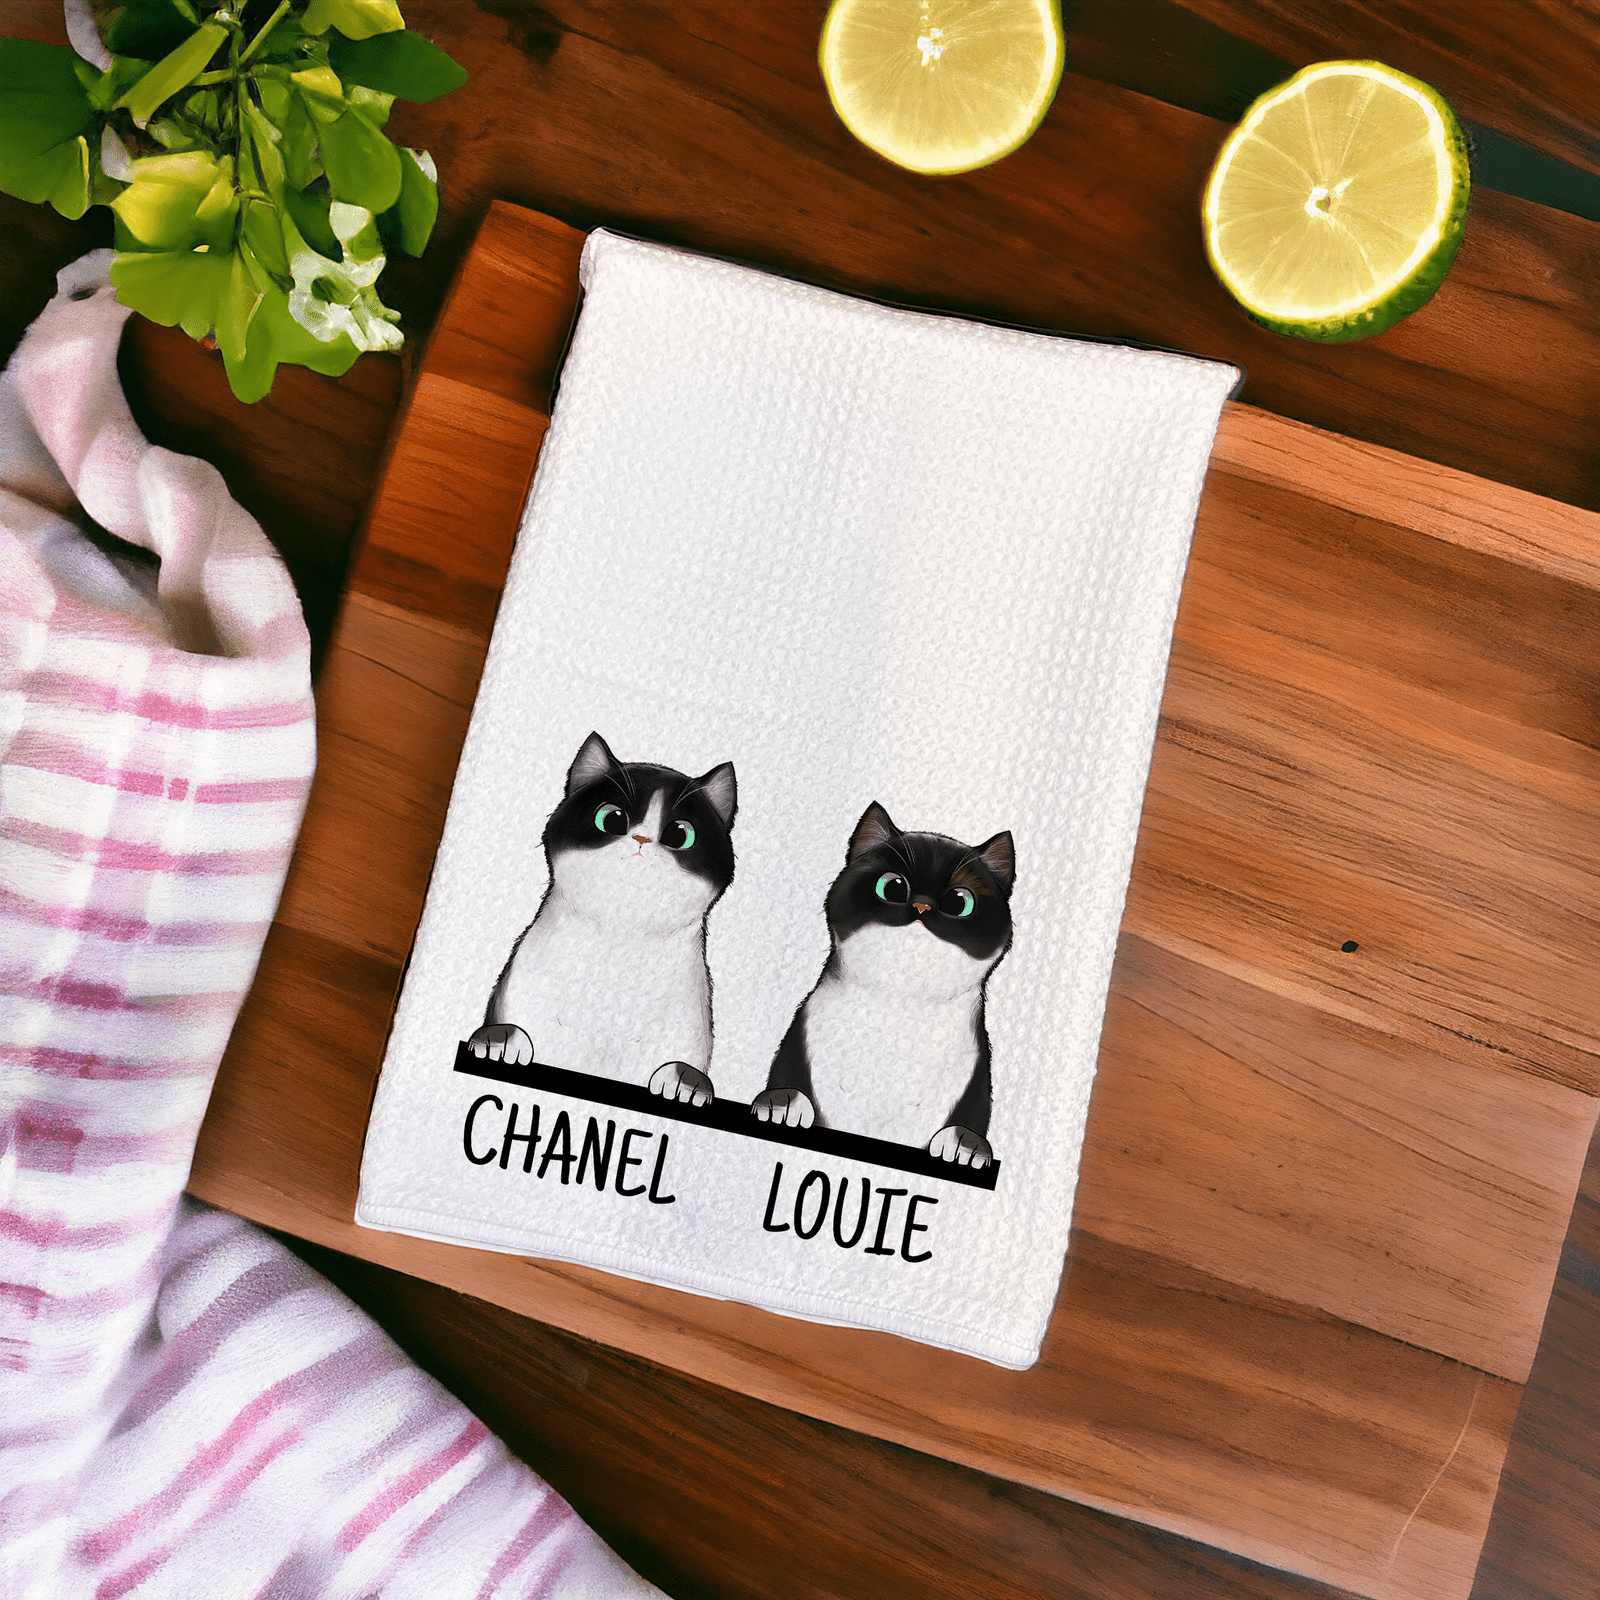 Pick Your Peeking Cats & Names Waffle Weave Kitchen Towel - Add up to 6 kitties!